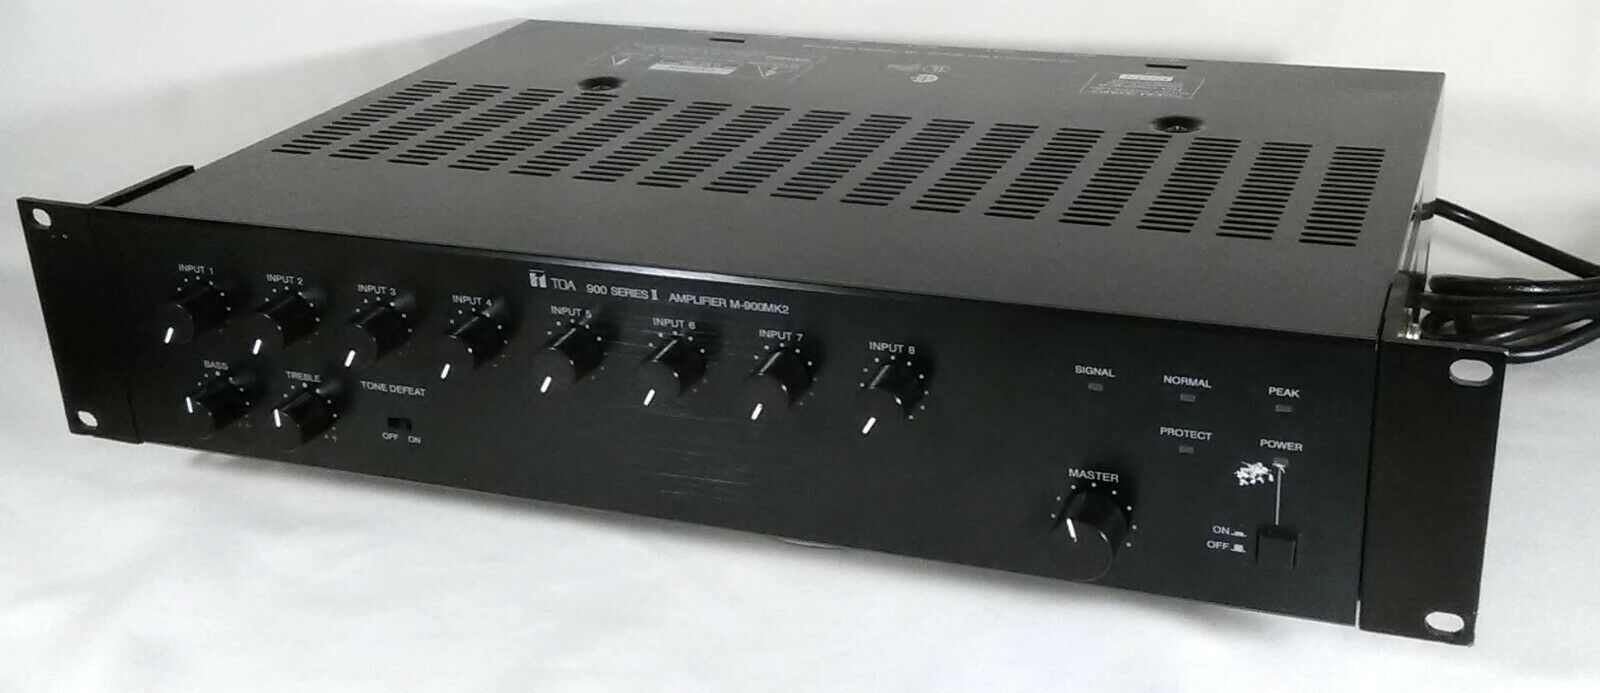 TOA M900 8-CHANNEL MIXER WITH WARRANTY, UP TO 8 INPUT MODULES SUPPLIED